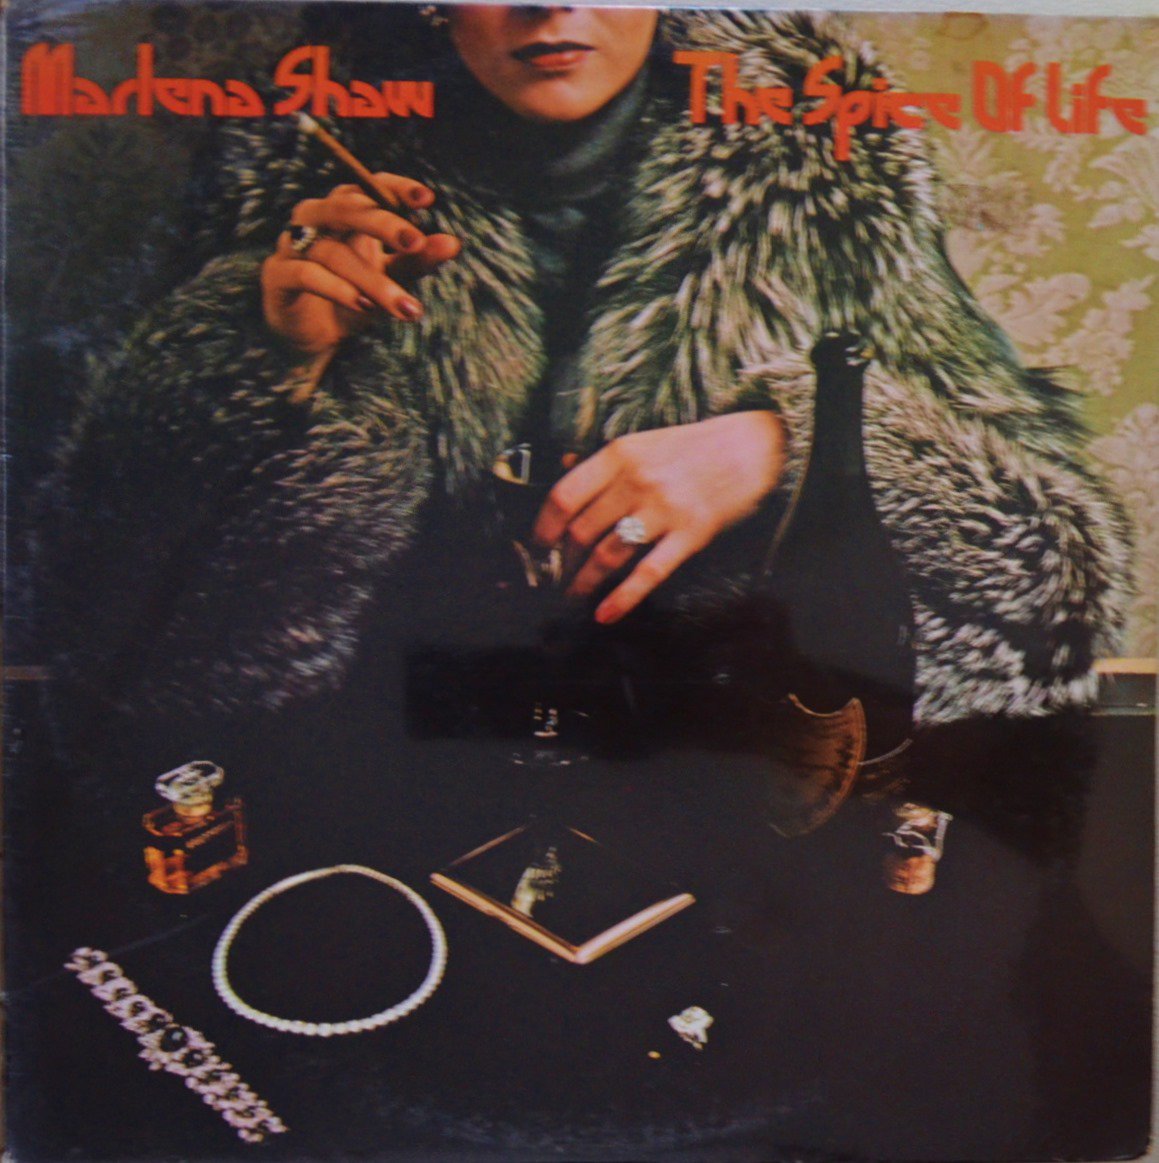 MARLENA SHAW / THE SPICE OF LIFE (LP)